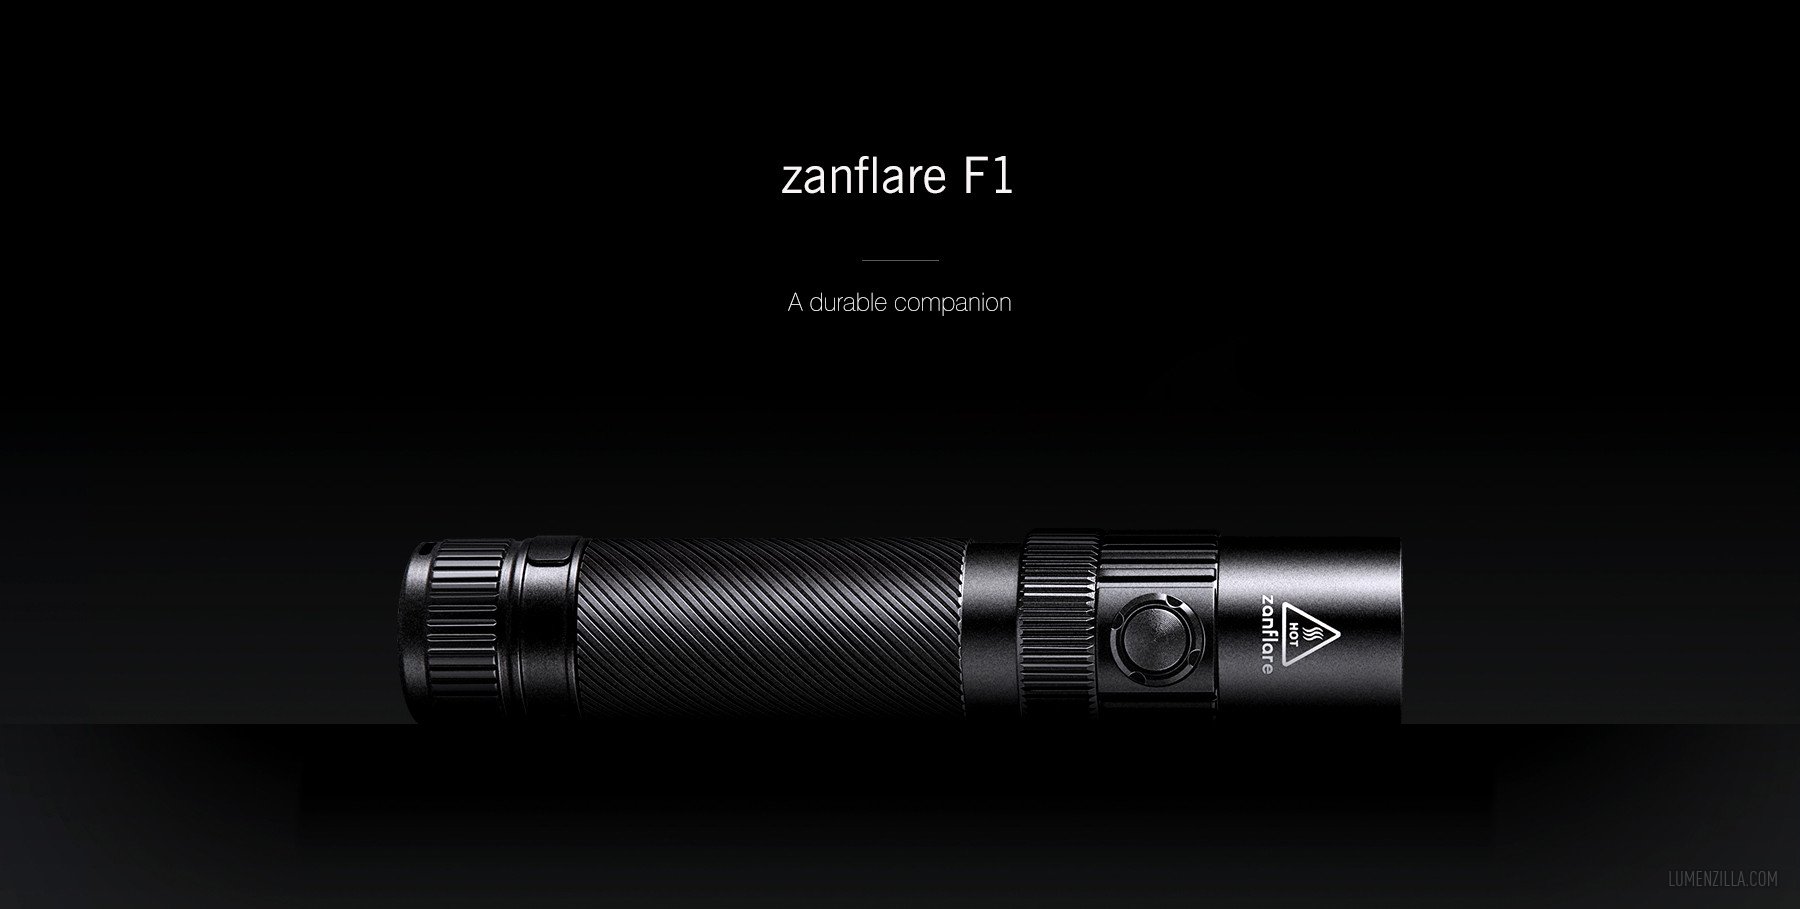 Zanflare F1 by Gearbest